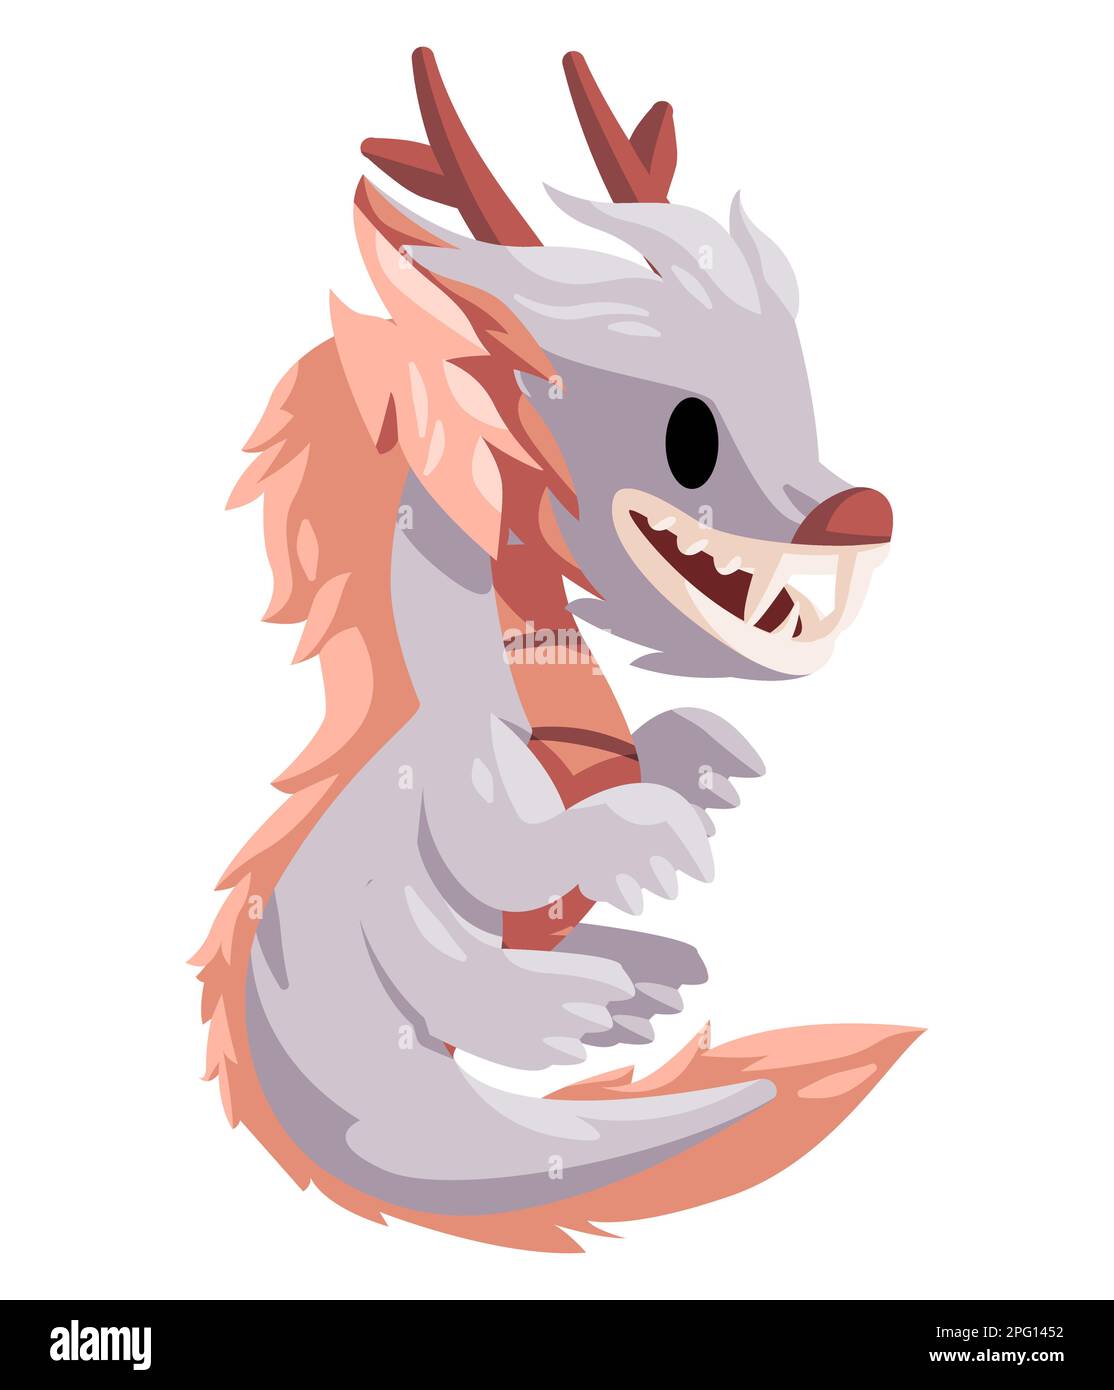 Dragon character of chinese mythology monster with funny mascot cartoon style grey color Stock Vector